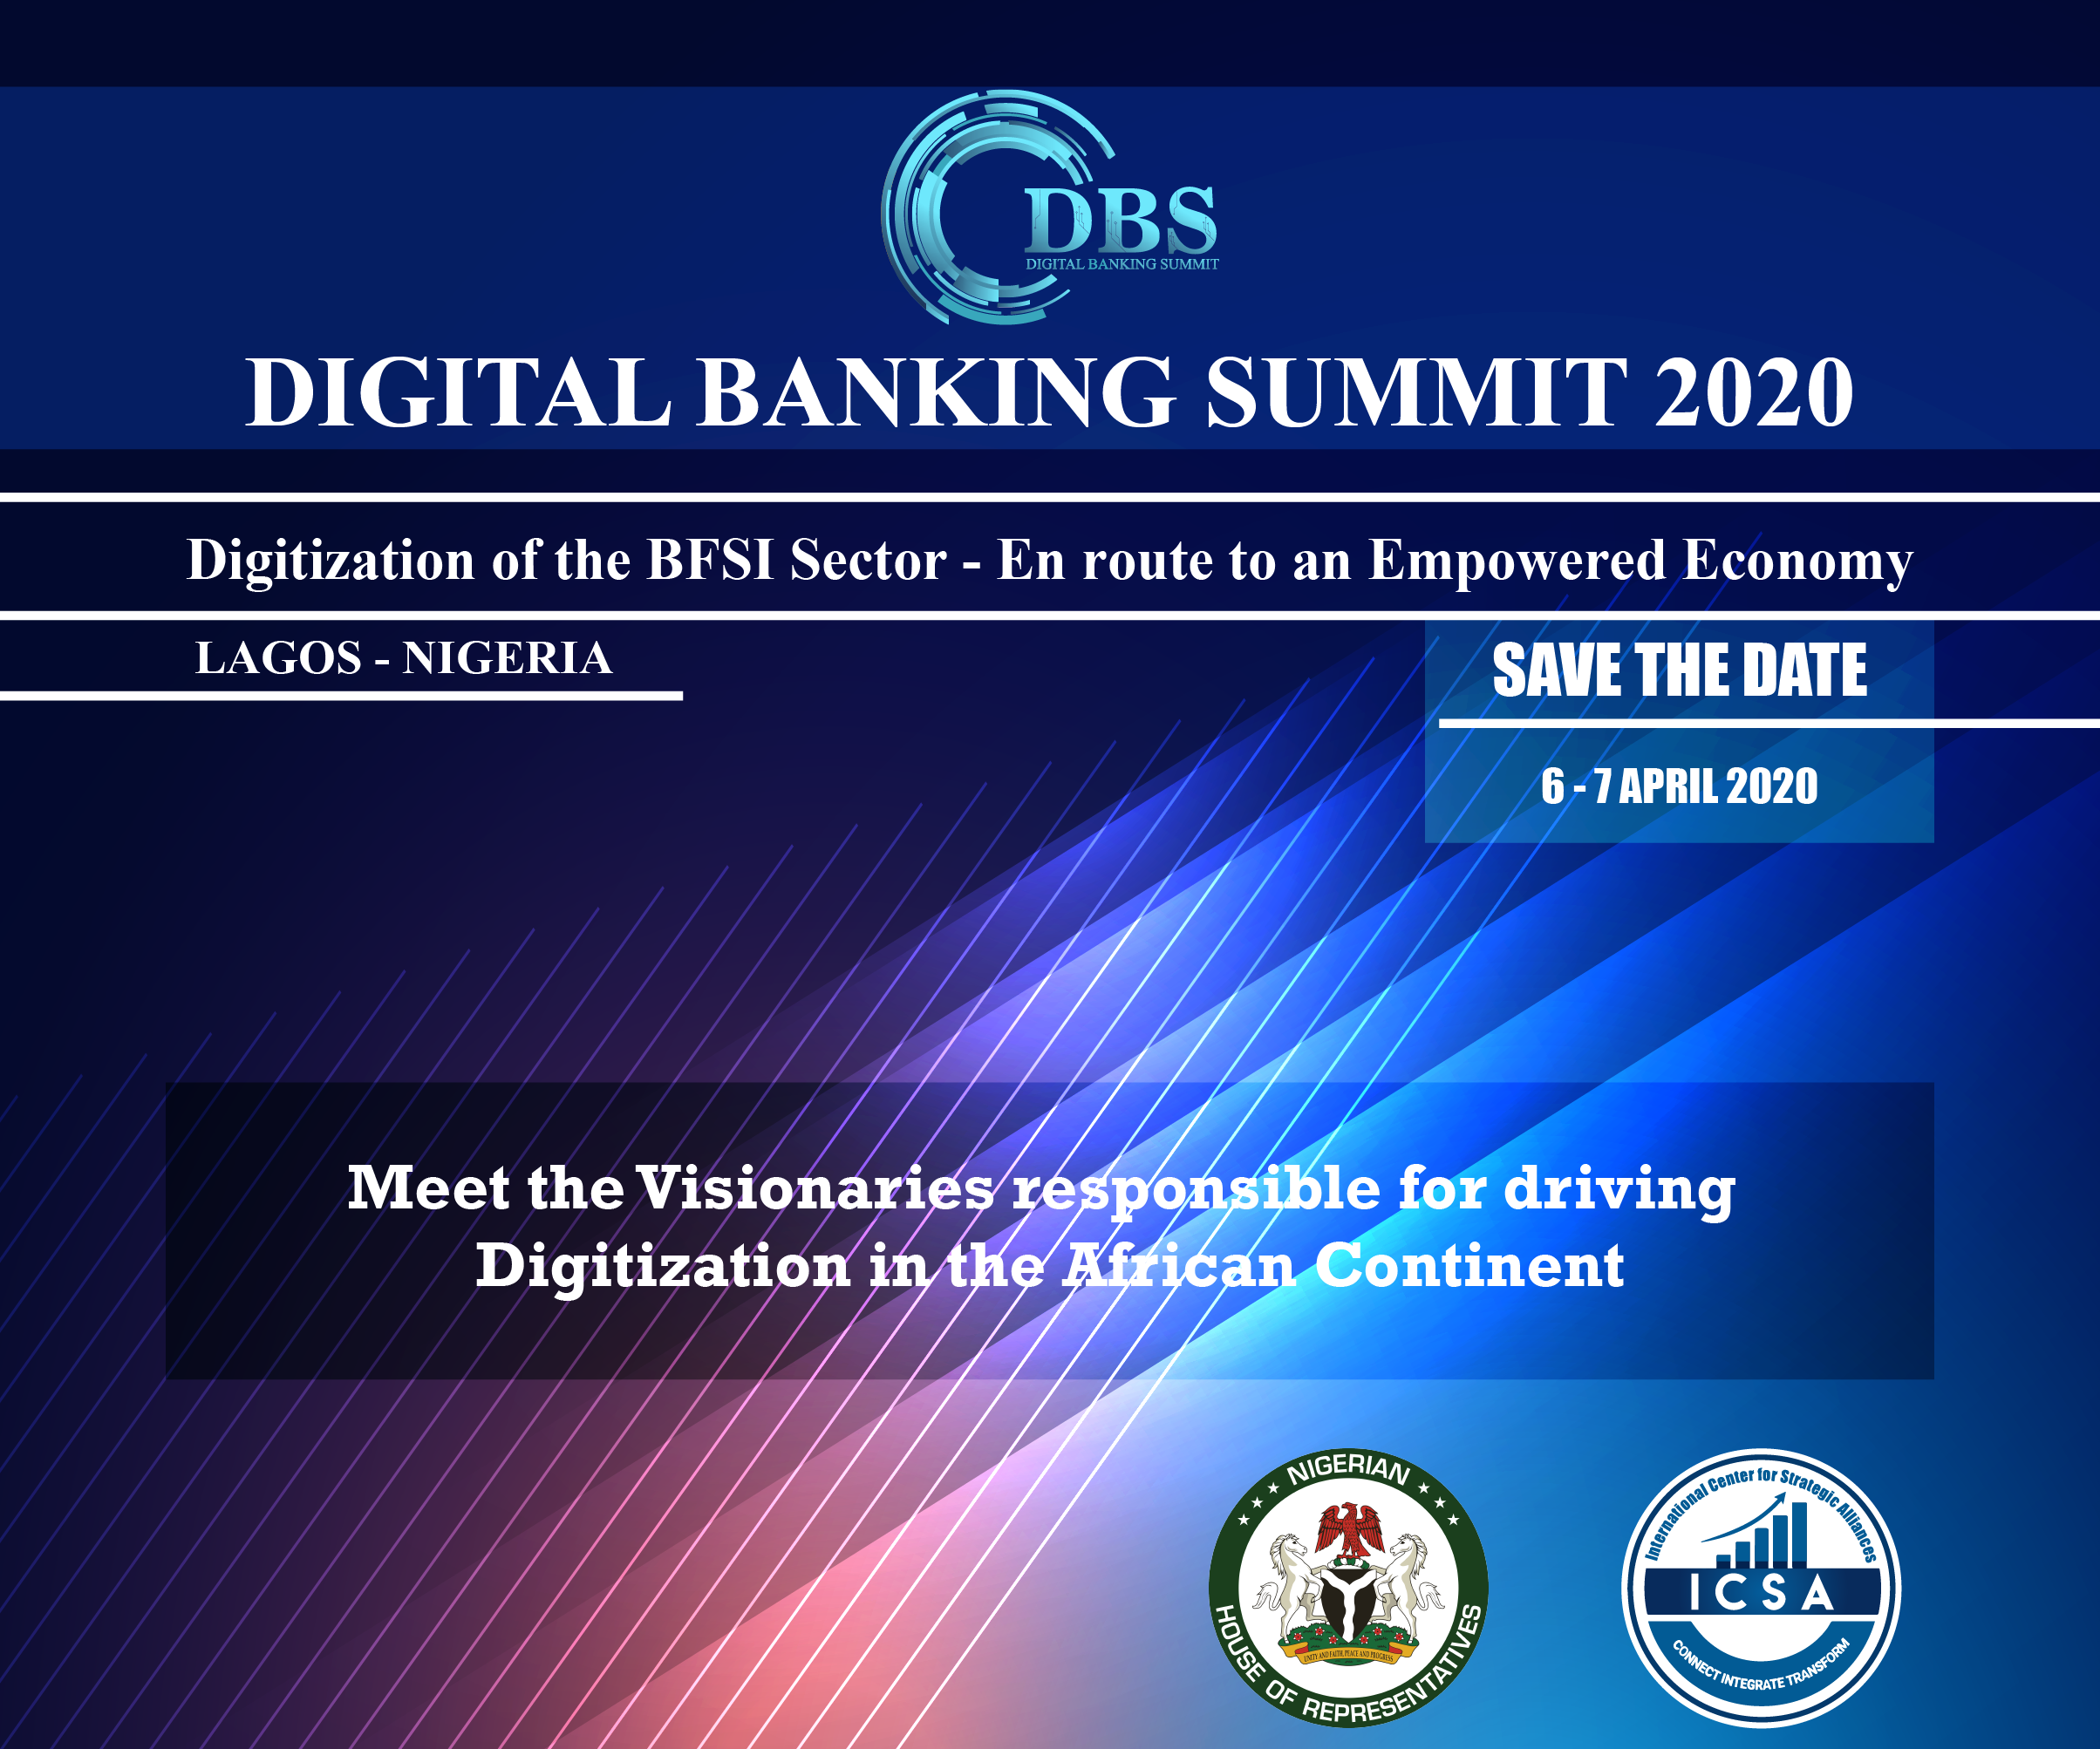 Digital Banking Summit - Innovation and Excellence Awards 2020, Lagos, Nigeria